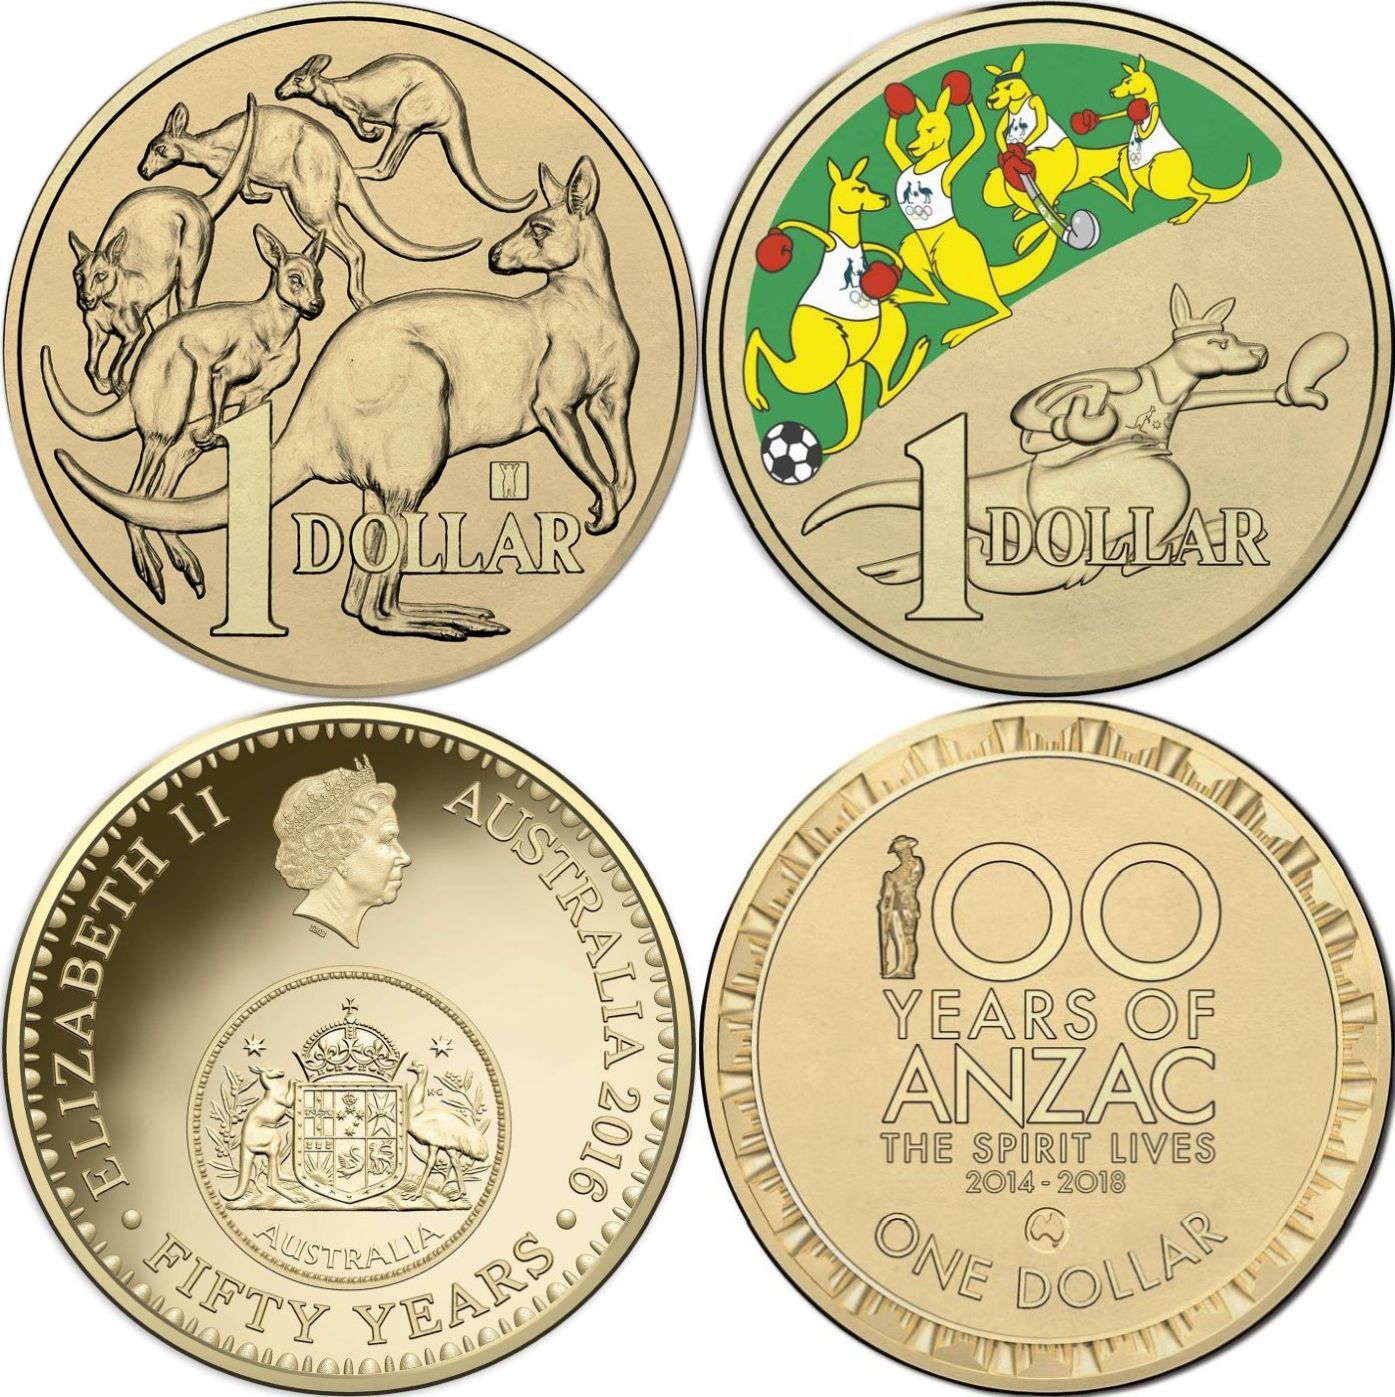 Perth and Brisbane- $1 Aust UNC Coins 2019 MOB OF ROOS Privymarks 2 coins